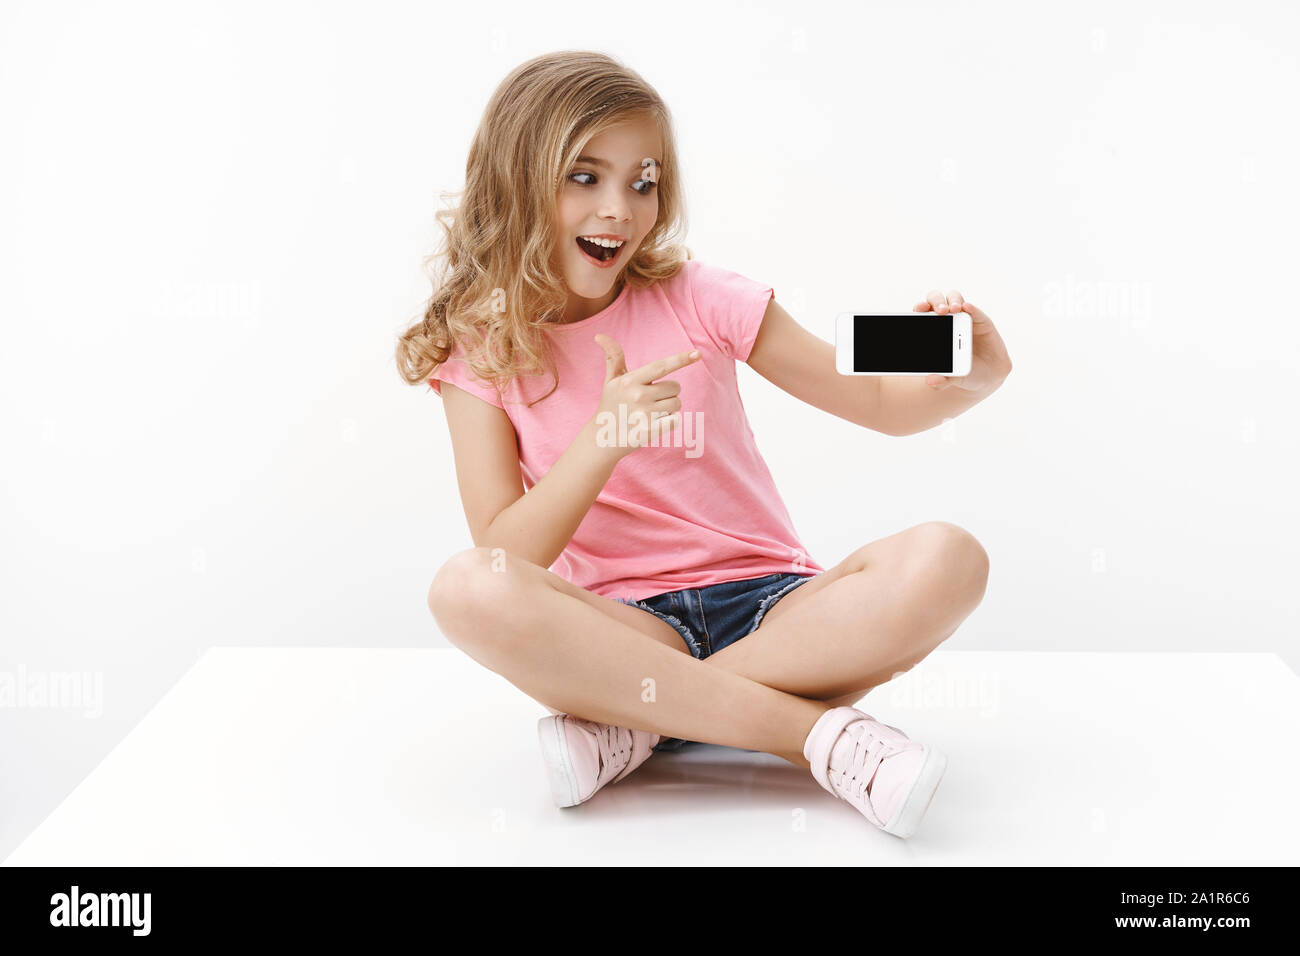 Cheerful excited cute blond little girl sitting on floor with ...